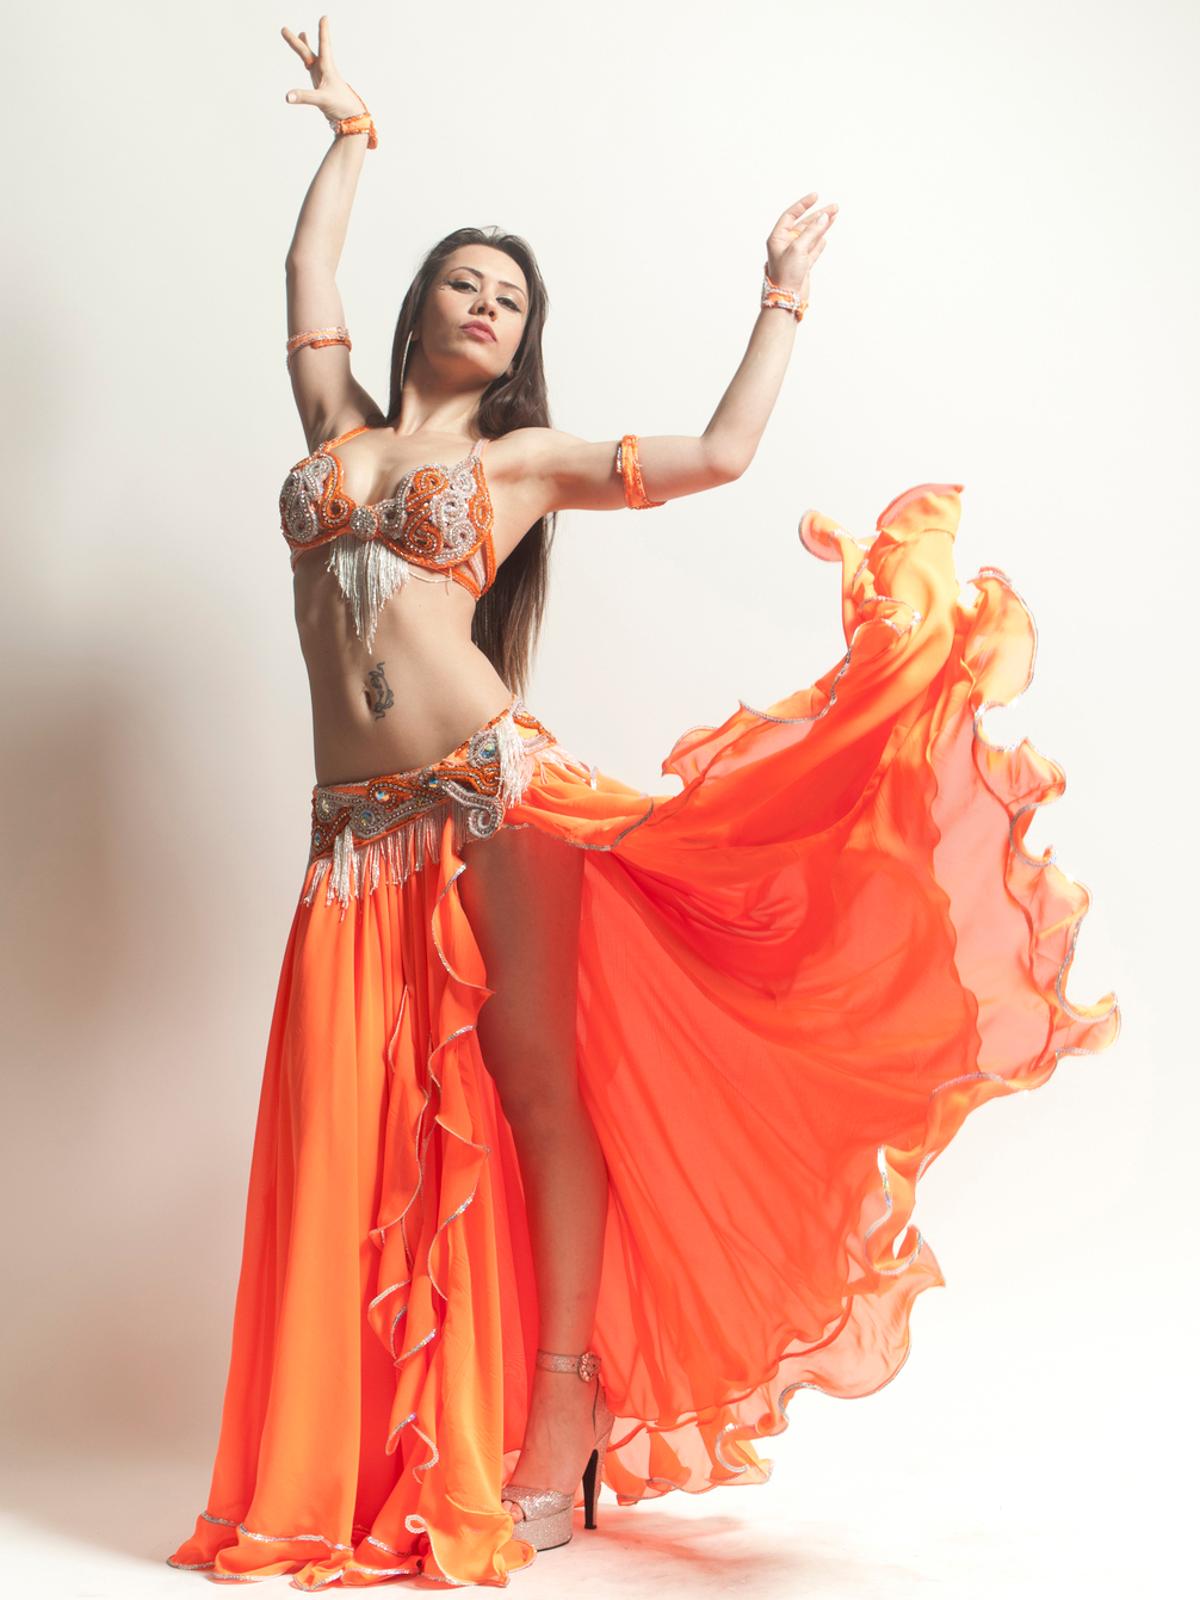 Ritualistic, Romantic or Rebellious? The History of Belly Dancing